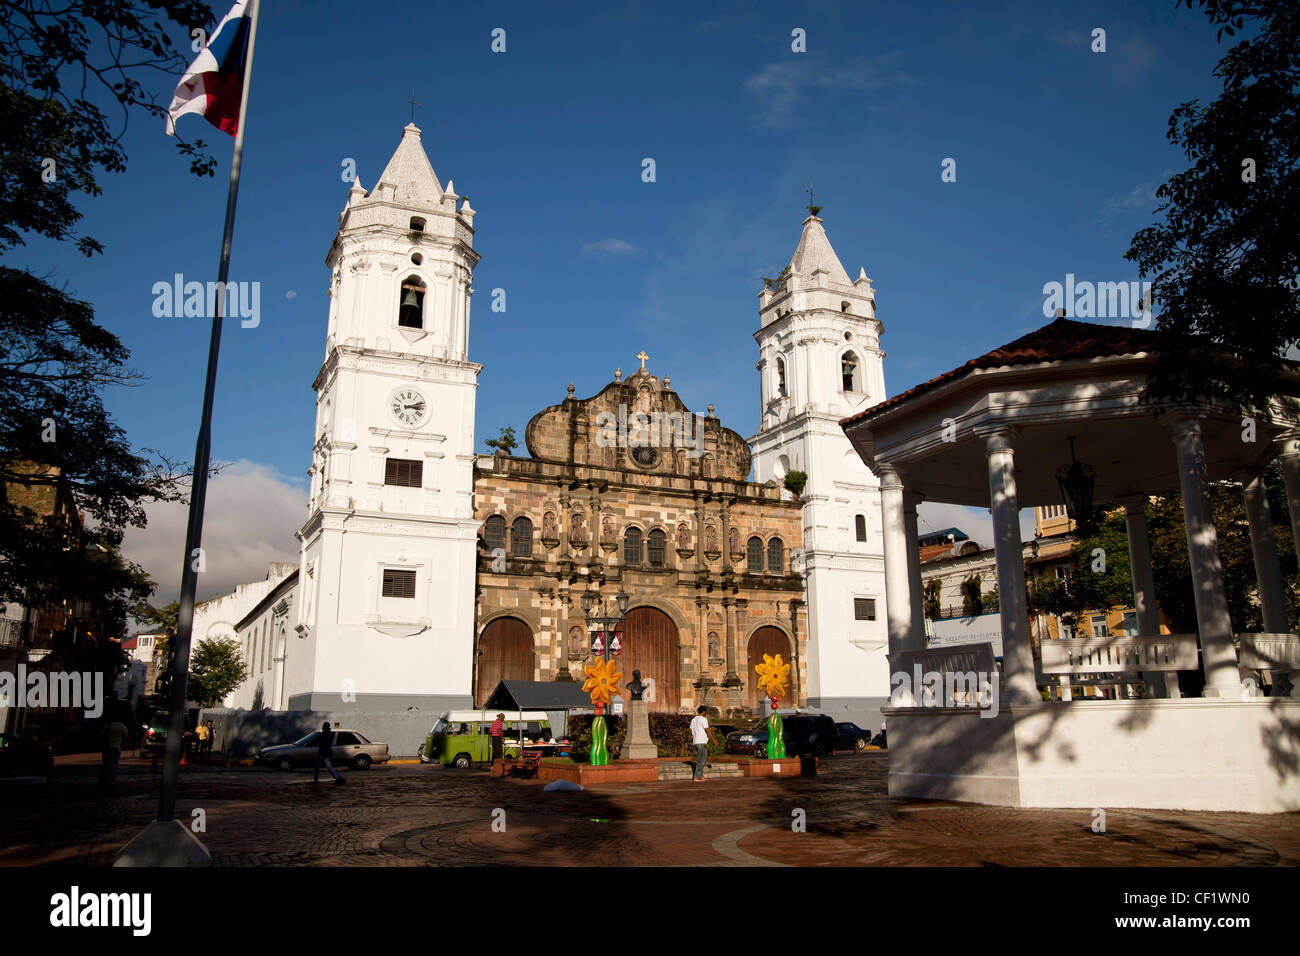 Plaza de la Independencia and the cathedral in the Old City, Casco Viejo, Panama City, Panama, Central America Stock Photo